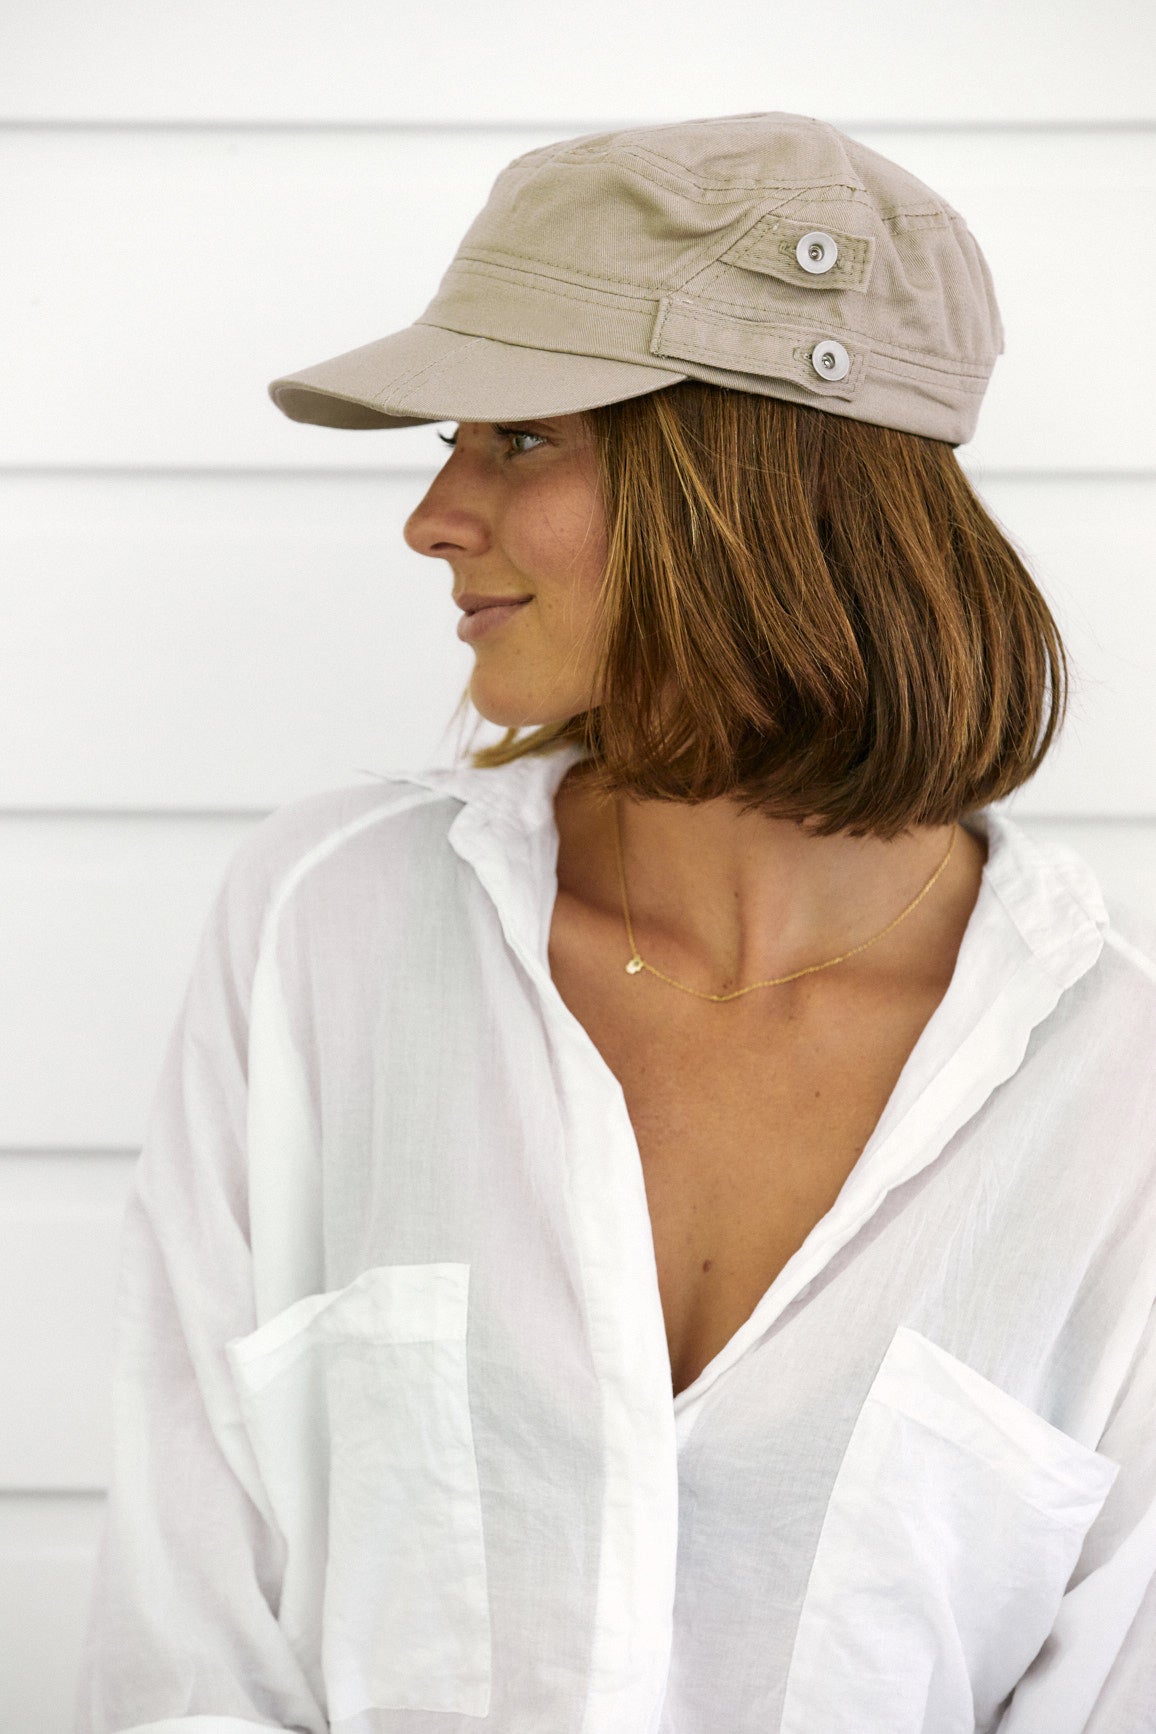 Woman wearing Khaki organic cotton field army fatigue cap with silver buttons on side